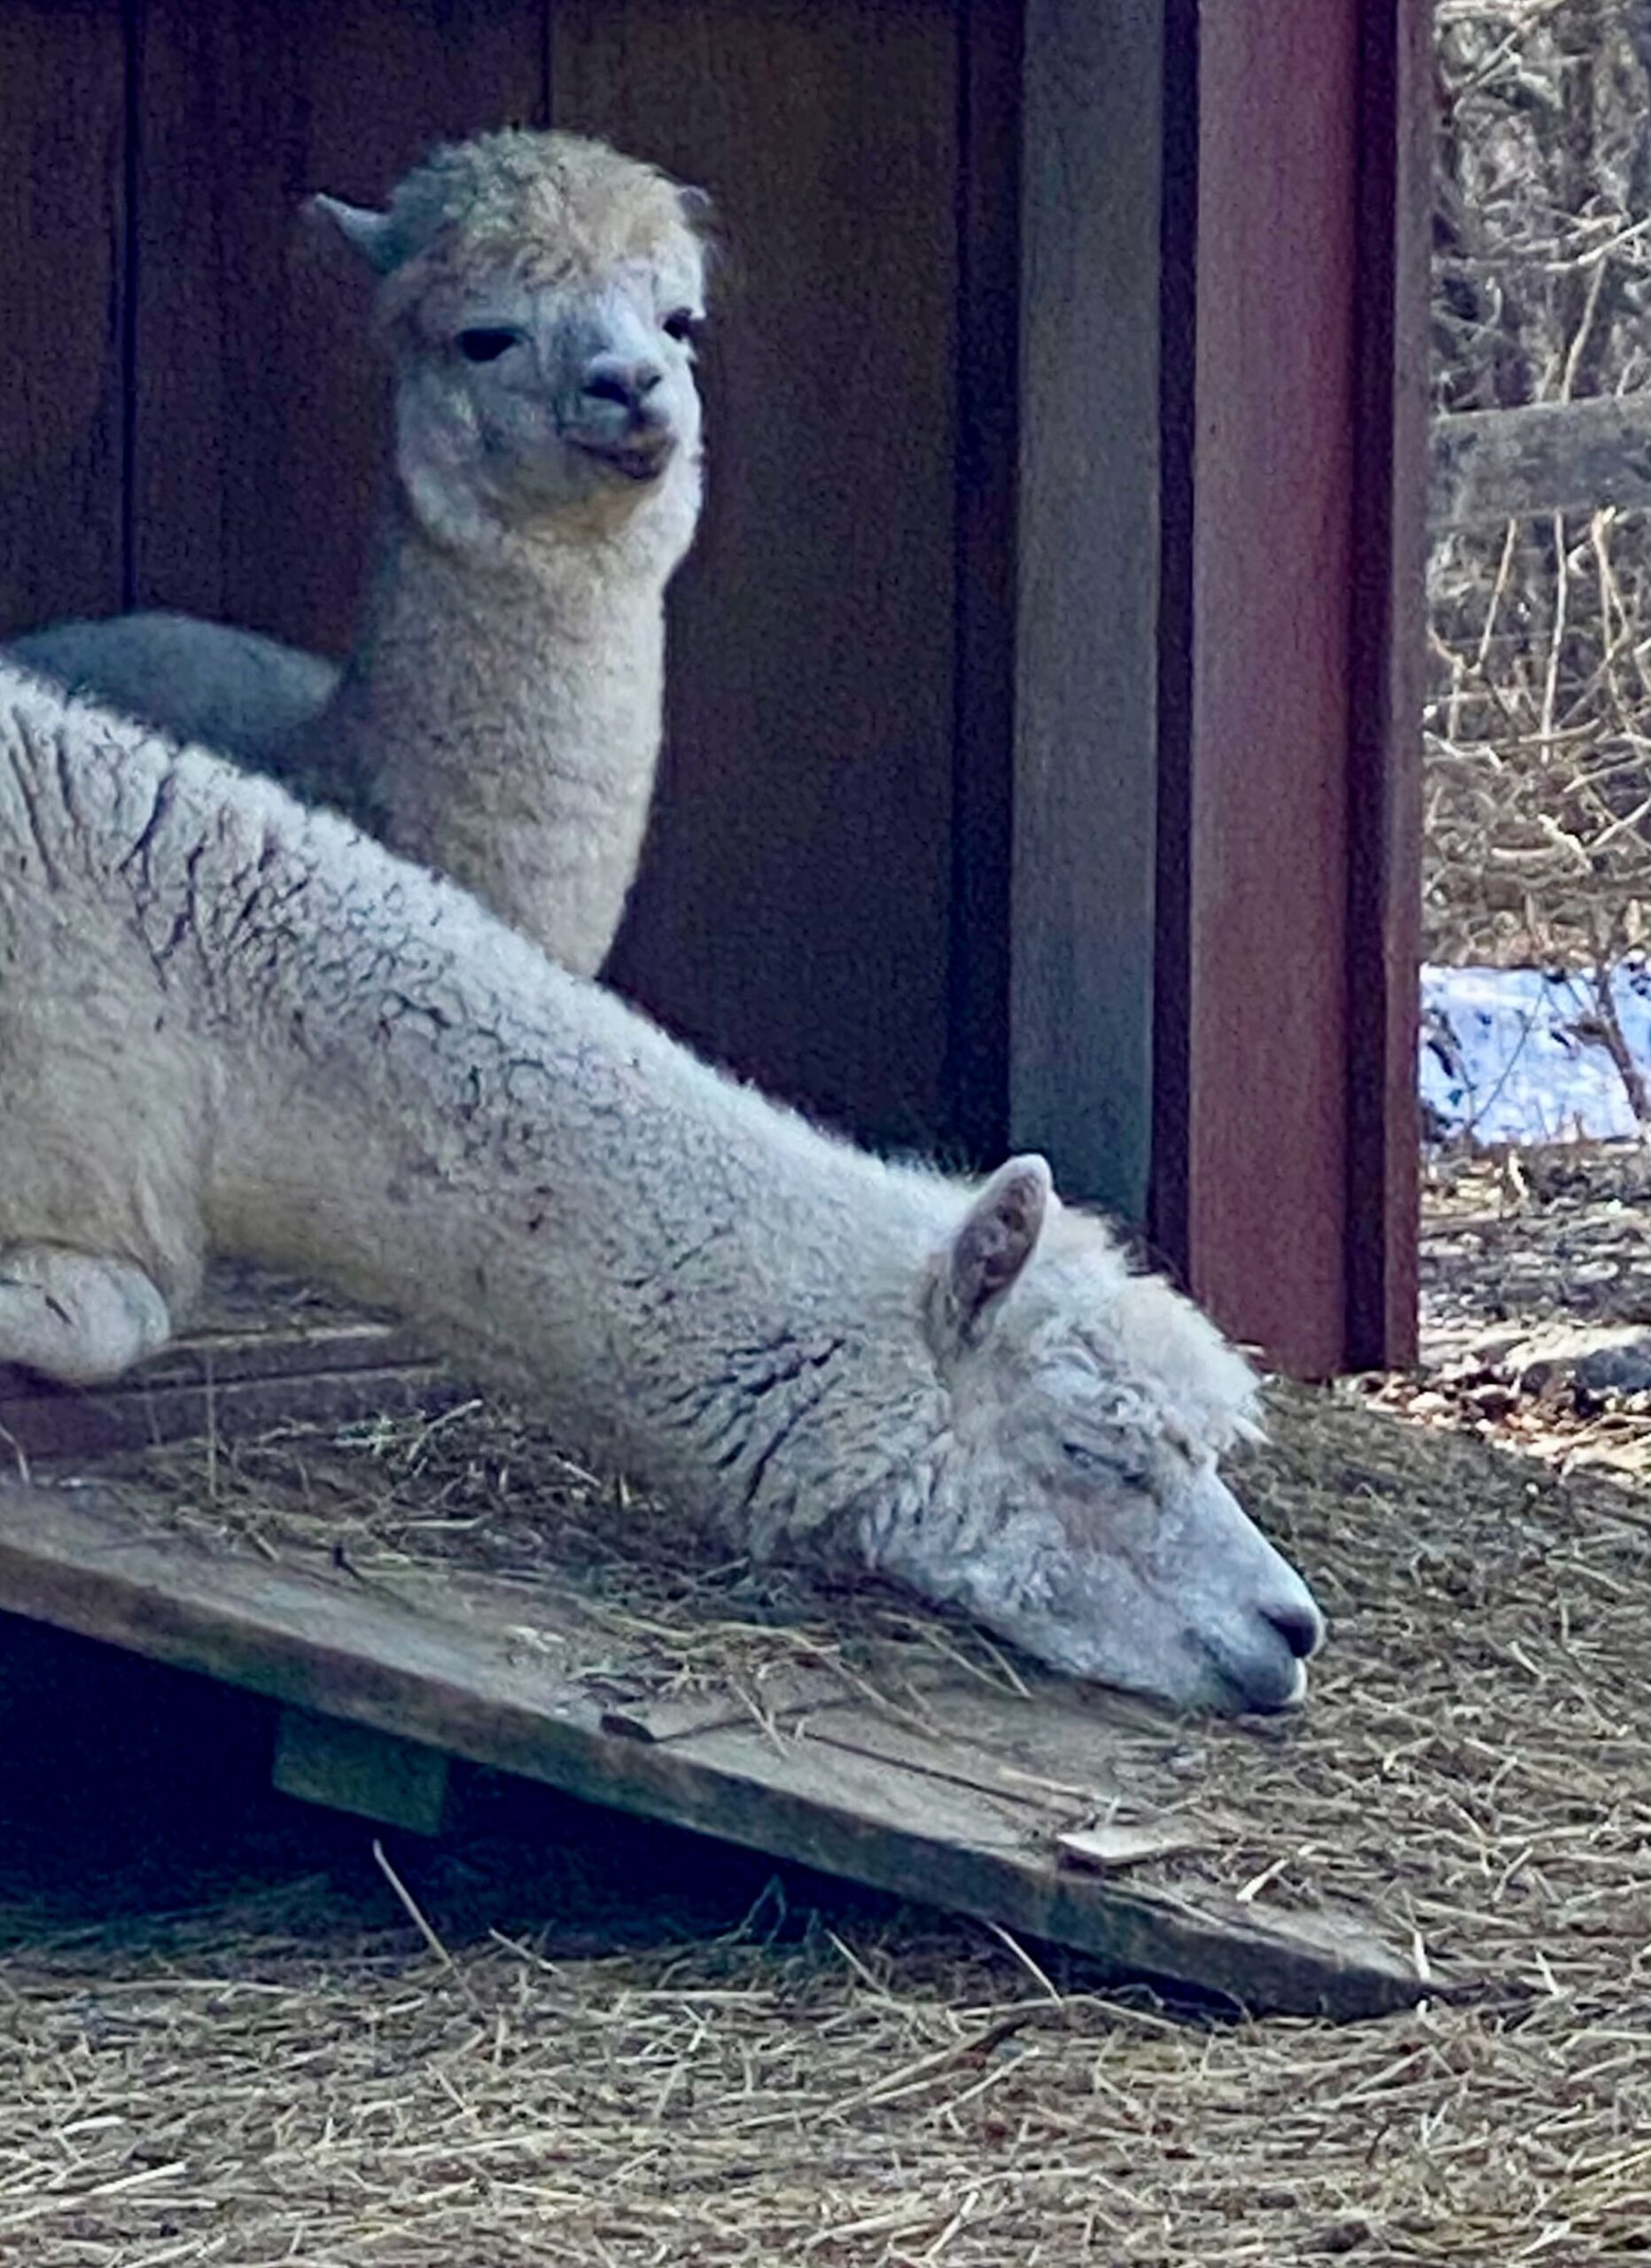 It's the weekend! Number 331, Two White Alpaca at the Lexington Community Farm in Lexington, MA